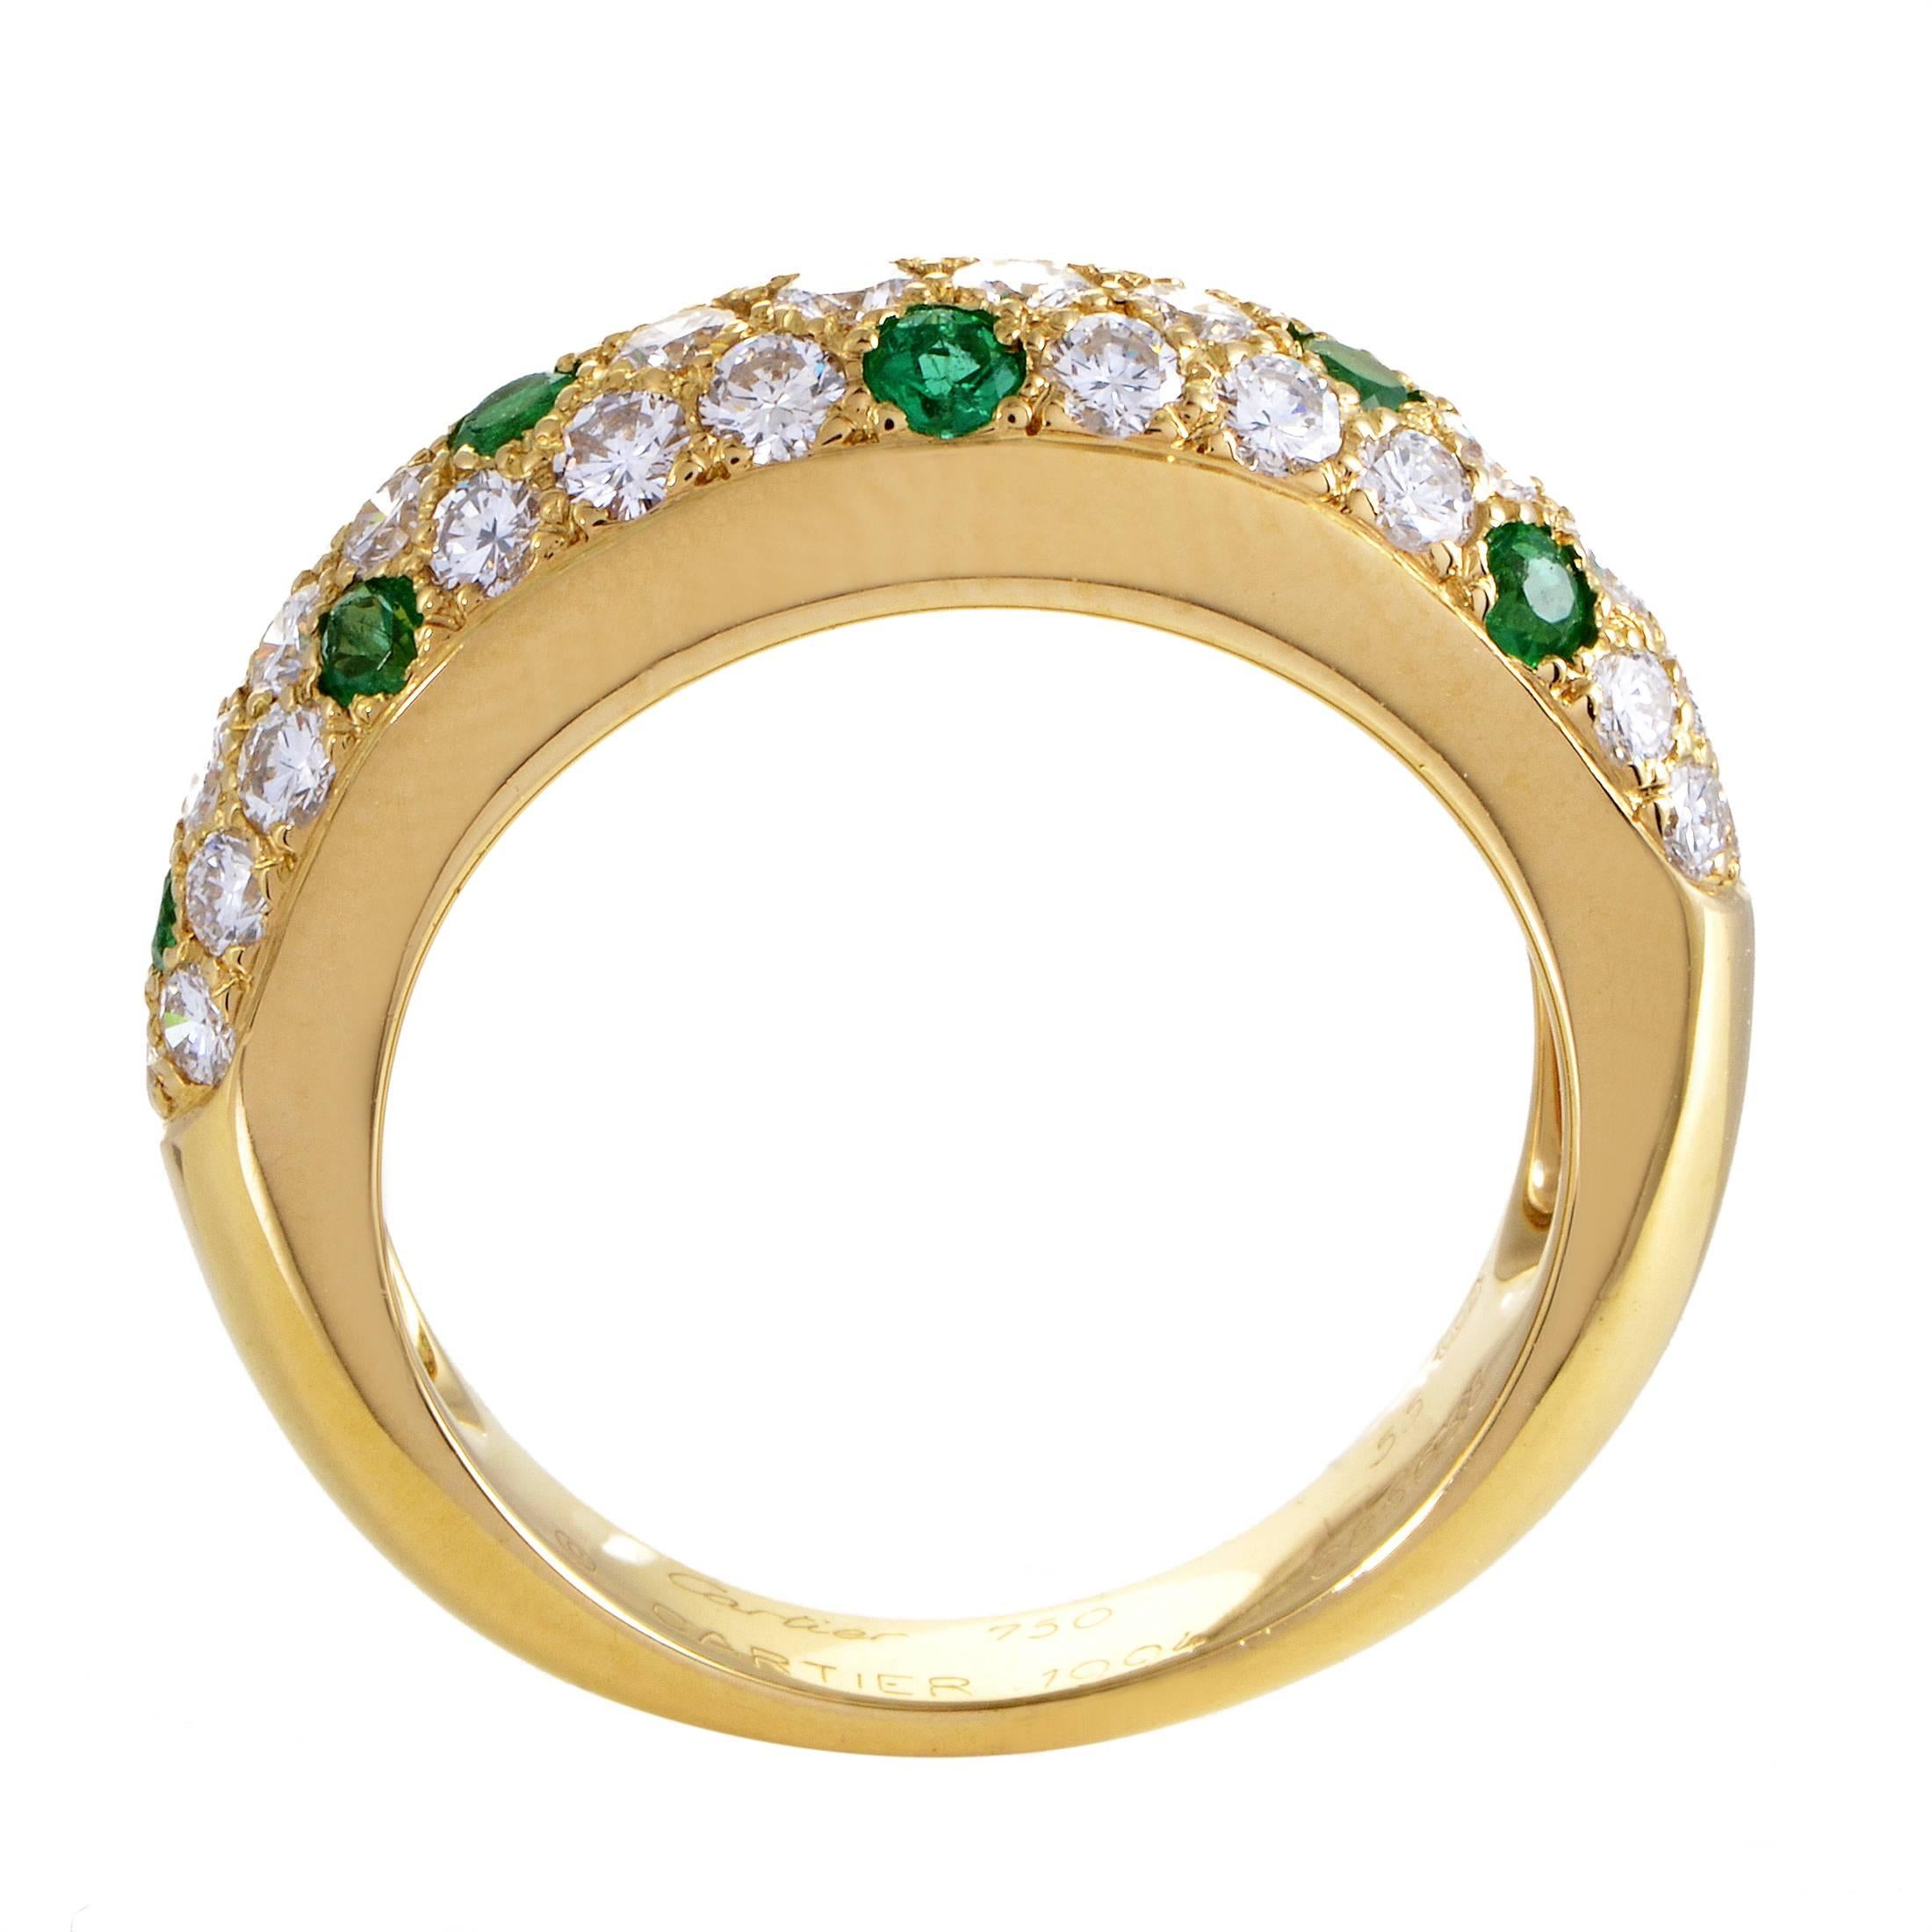 Prestigious excellence and tasteful elegance grace this magnificent ring from Cartier with immense allure, boasting a scintillating blend of sparkling diamonds totaling 1.00 carat and nifty emeralds amounting to 0.50ct set against the charming 18K